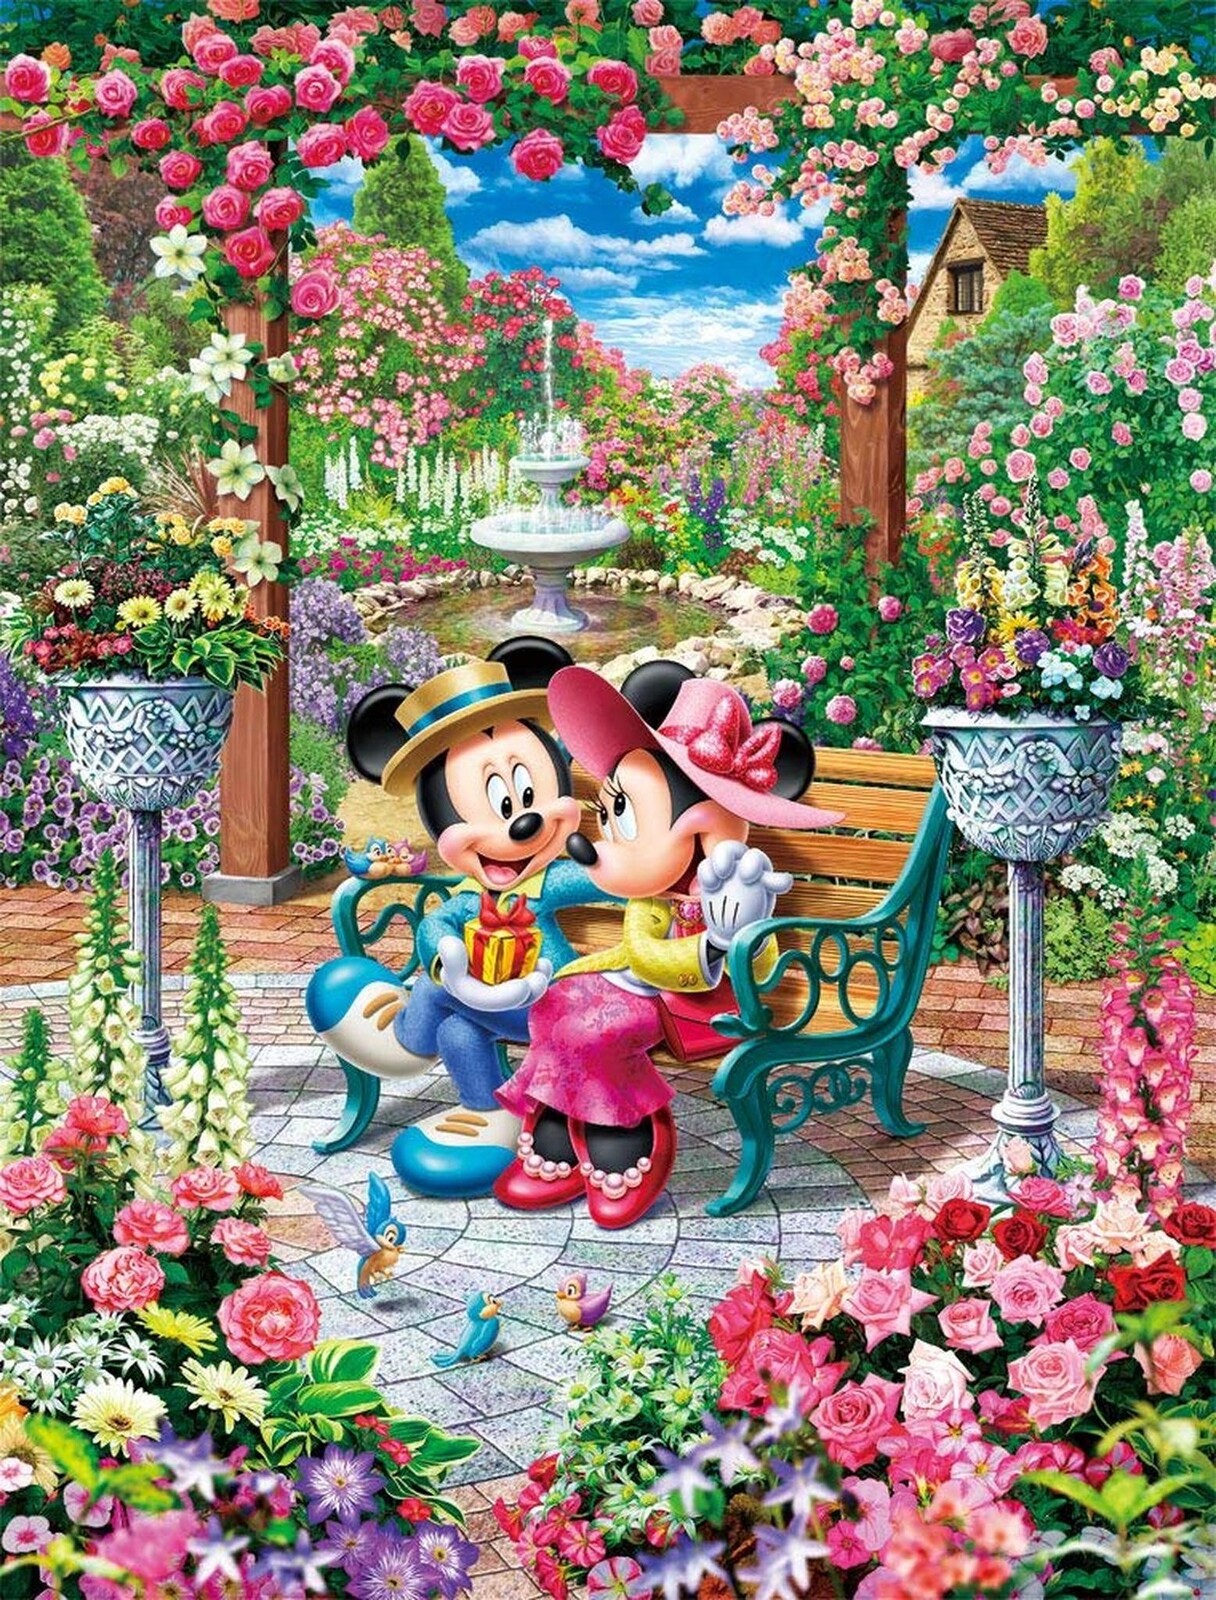 Tenyo Puzzle 500pc Disney Mickey and Minnie Blooming Love Royal Garden